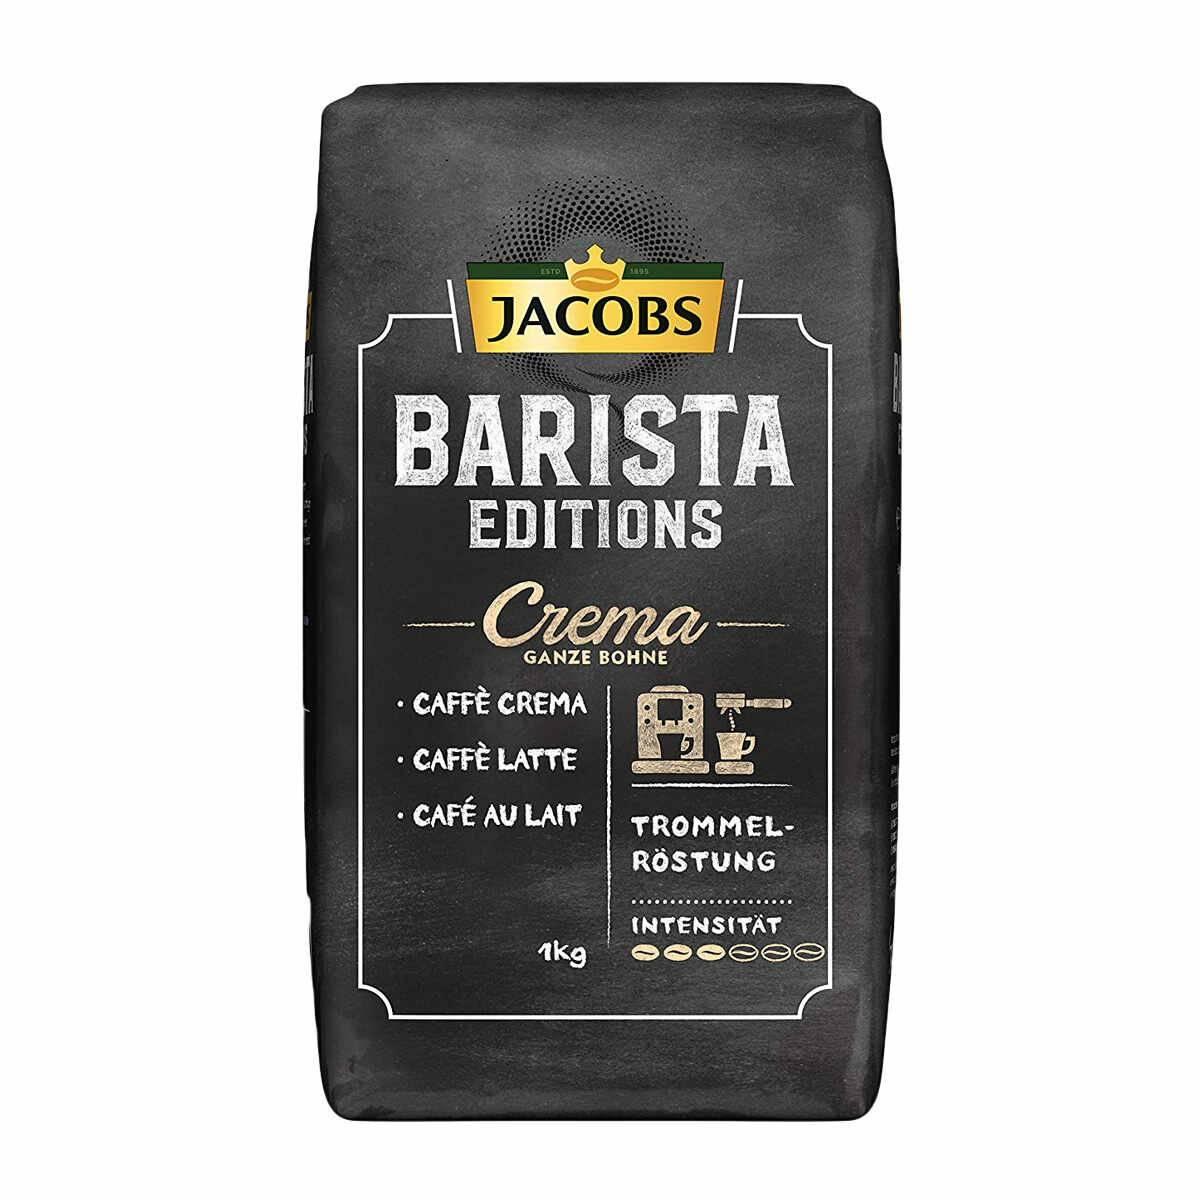 Jacobs Barista Editions Crema cafea boabe 1kg